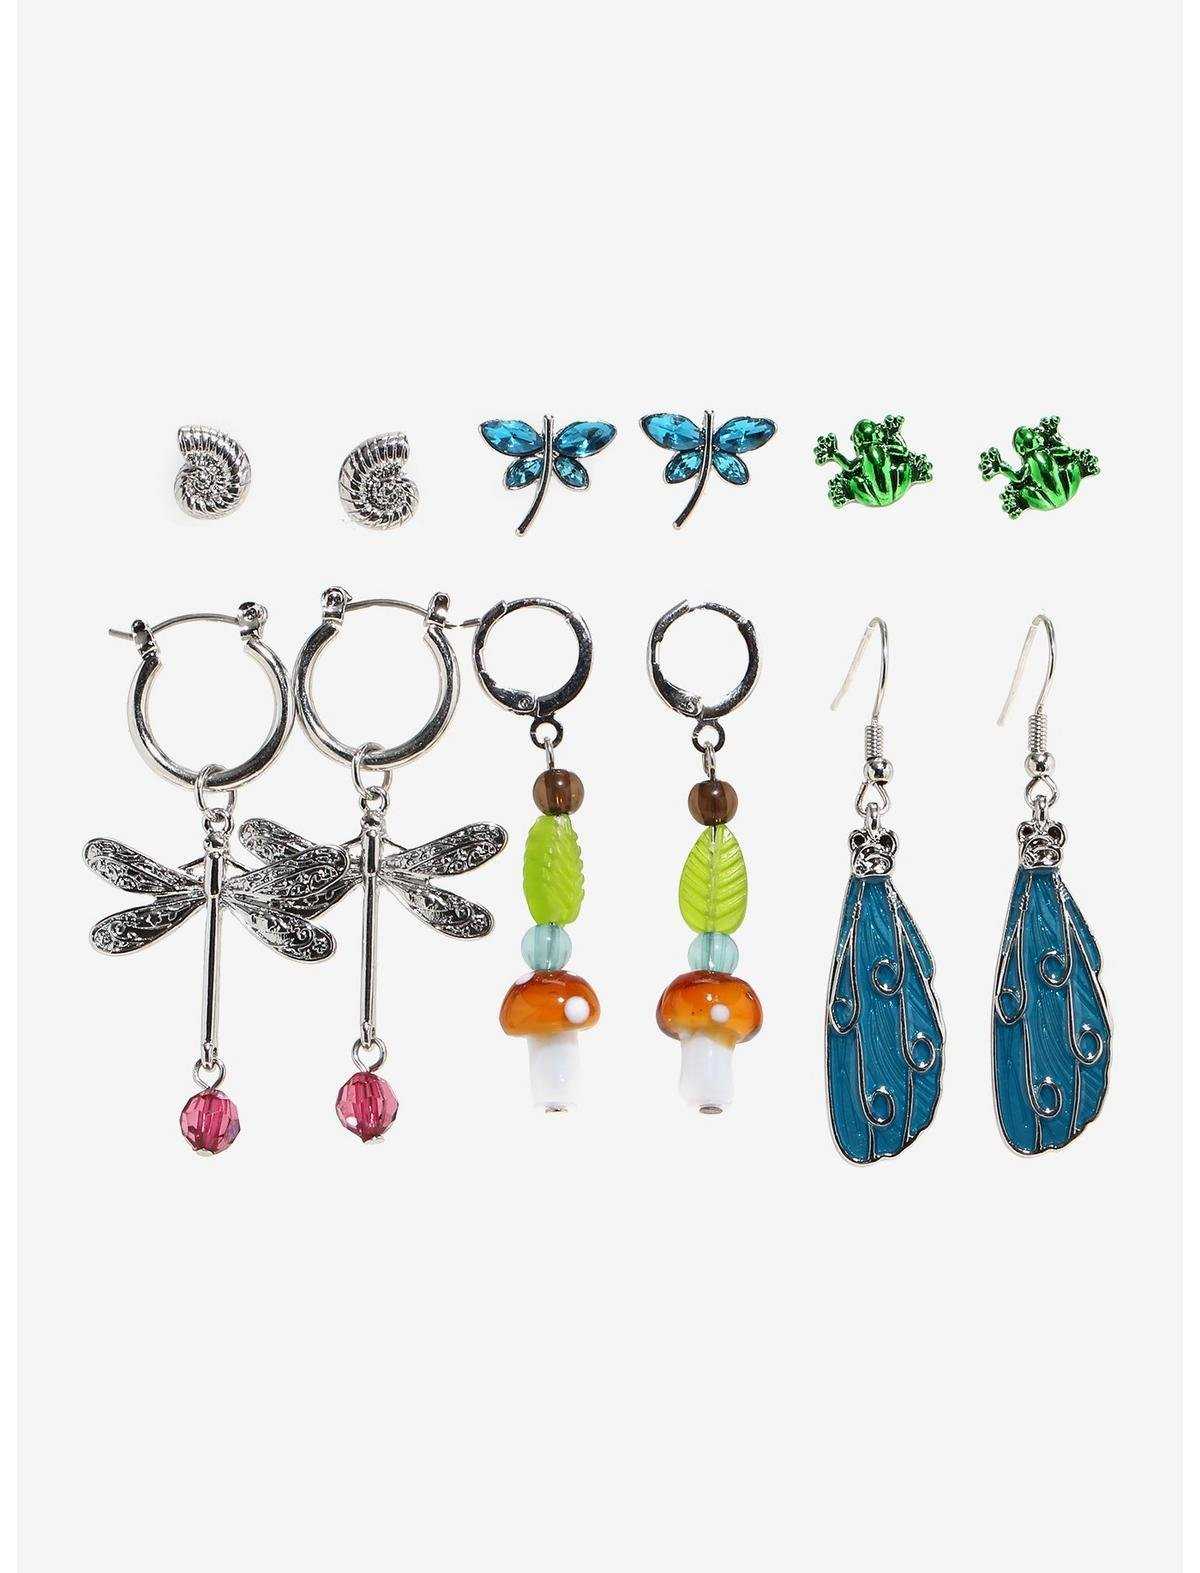 Thorn & Fable Dragonfly Forest Earring Set, , hi-res